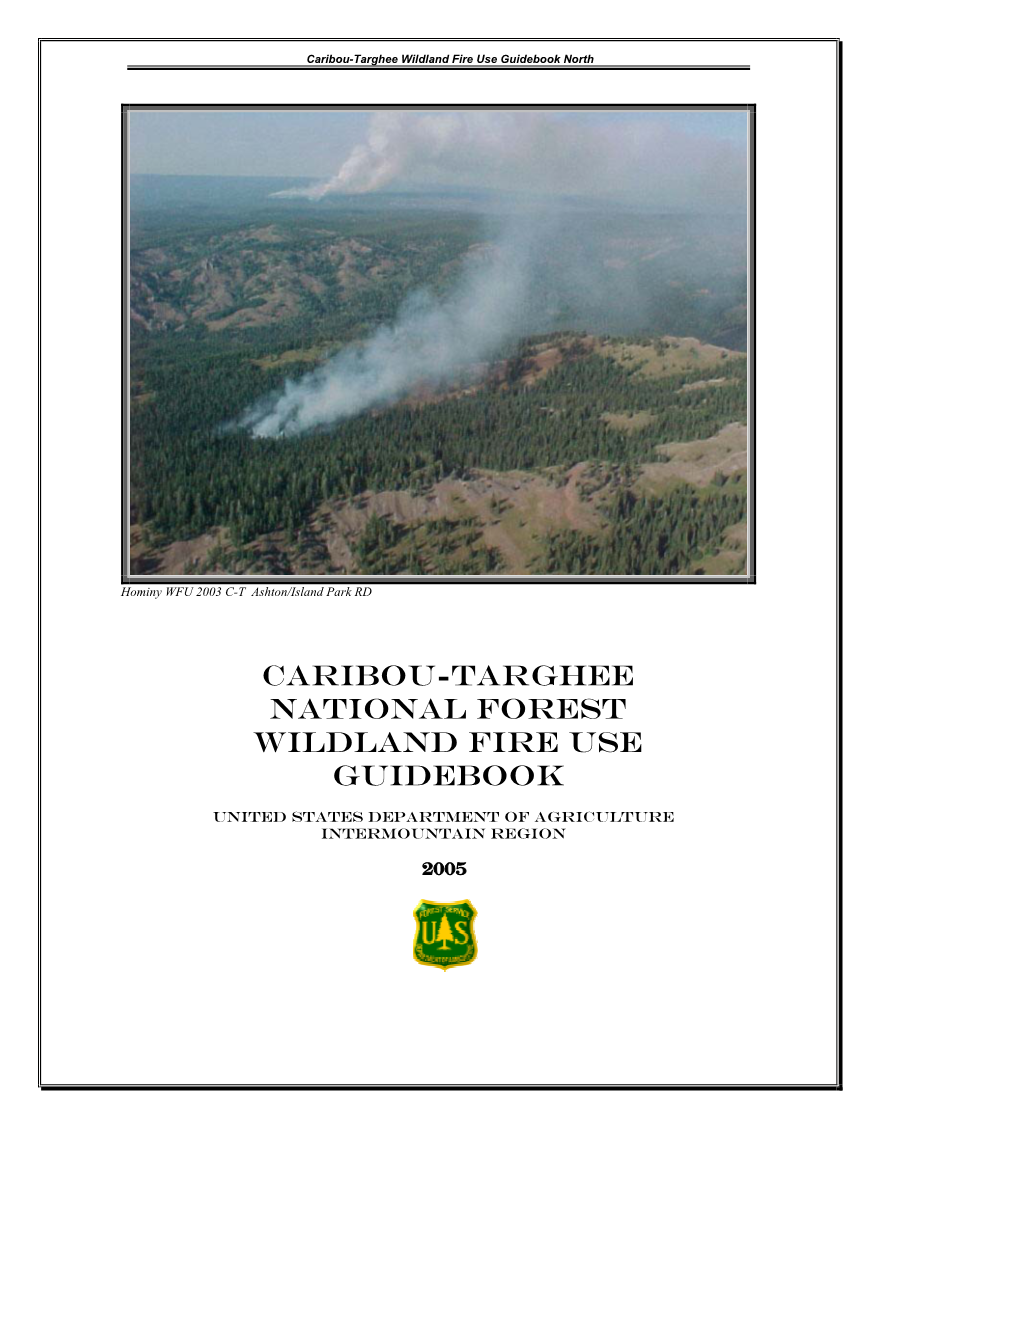 CARIBOU-TARGHEE National Forest WILDLAND FIRE USE GUIDEBOOK